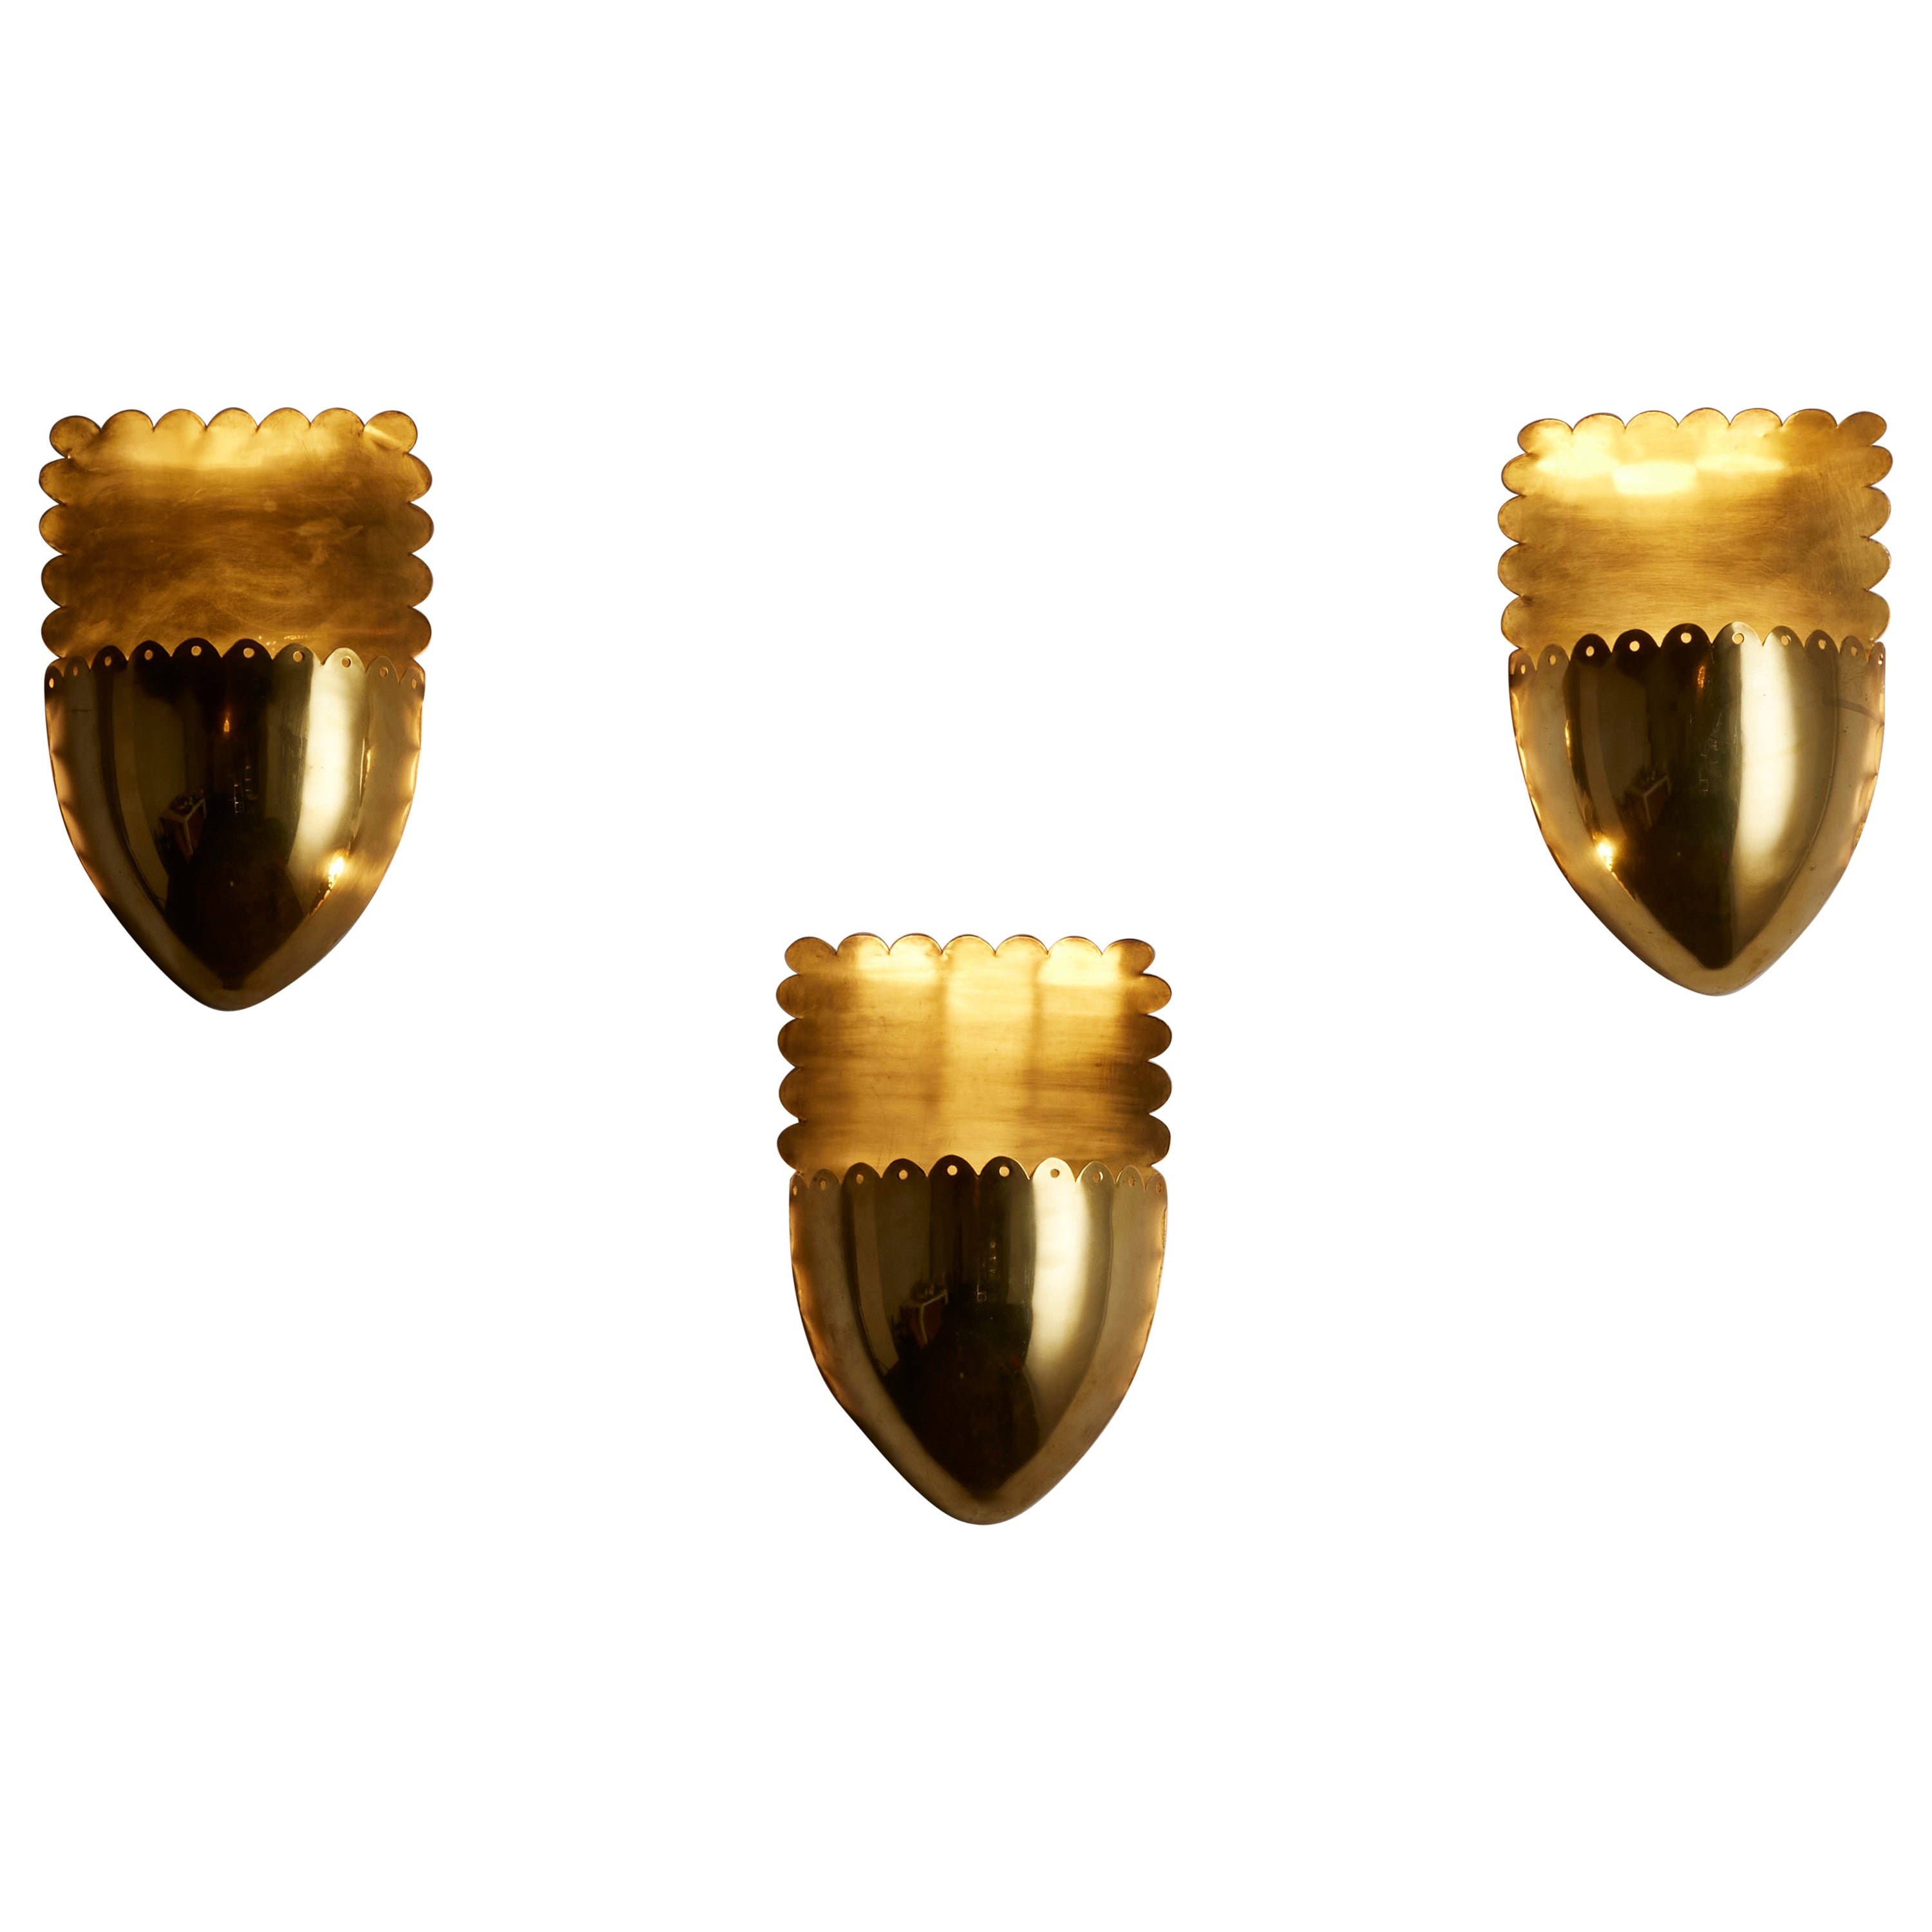 Single Italian scalloped pocket sconce. Custom designed and manufactured in Italy, circa 1940. Acorn shaped brass sconces with a furled crown for candle like light diffusion. Polished and patination over time. We recommend using three 40w maximum